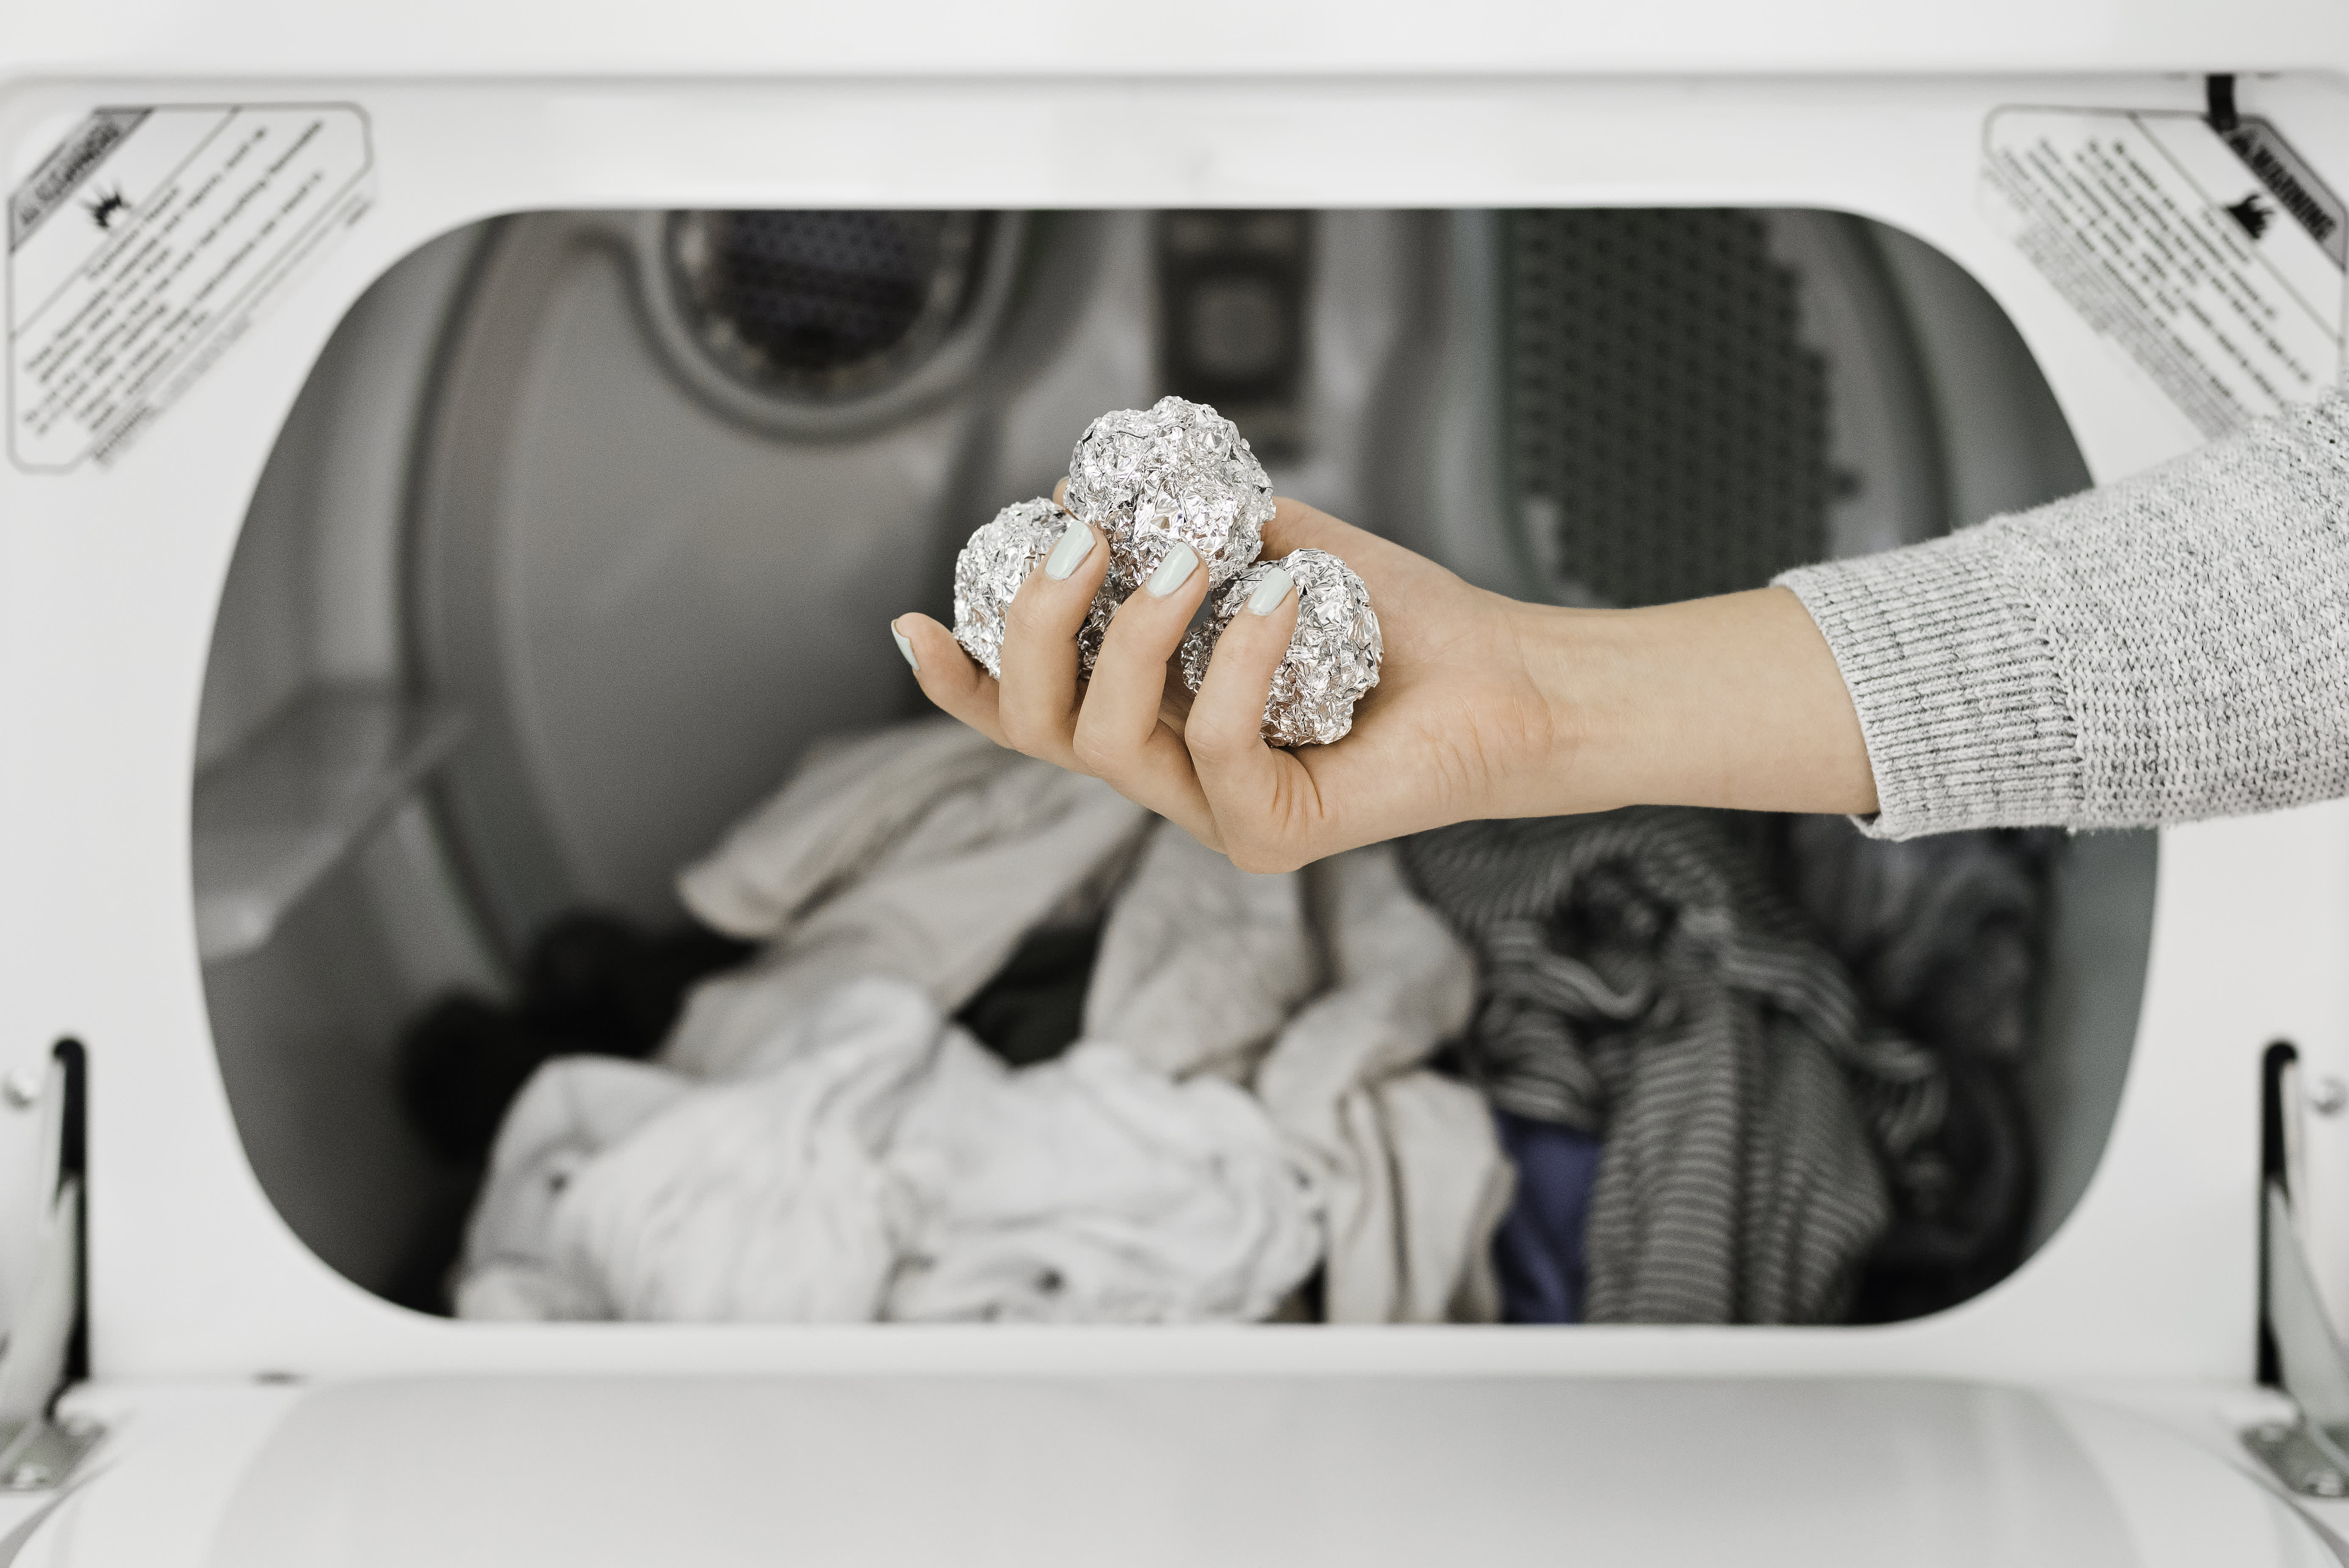 What Really Happens If You Put Aluminum Foil Balls In The Dryer